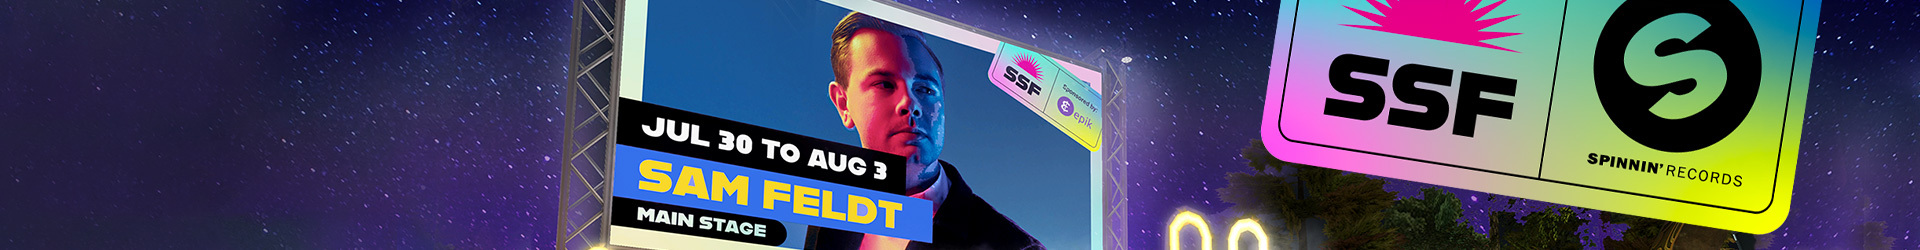 HOUSE MUSIC SUPERSTAR SAM FELDT TO PERFORM FOR HUNDREDS OF THOUSANDS EVERY DAY ON AVAKIN LIFE APP, JULY 30-AUGUST 3